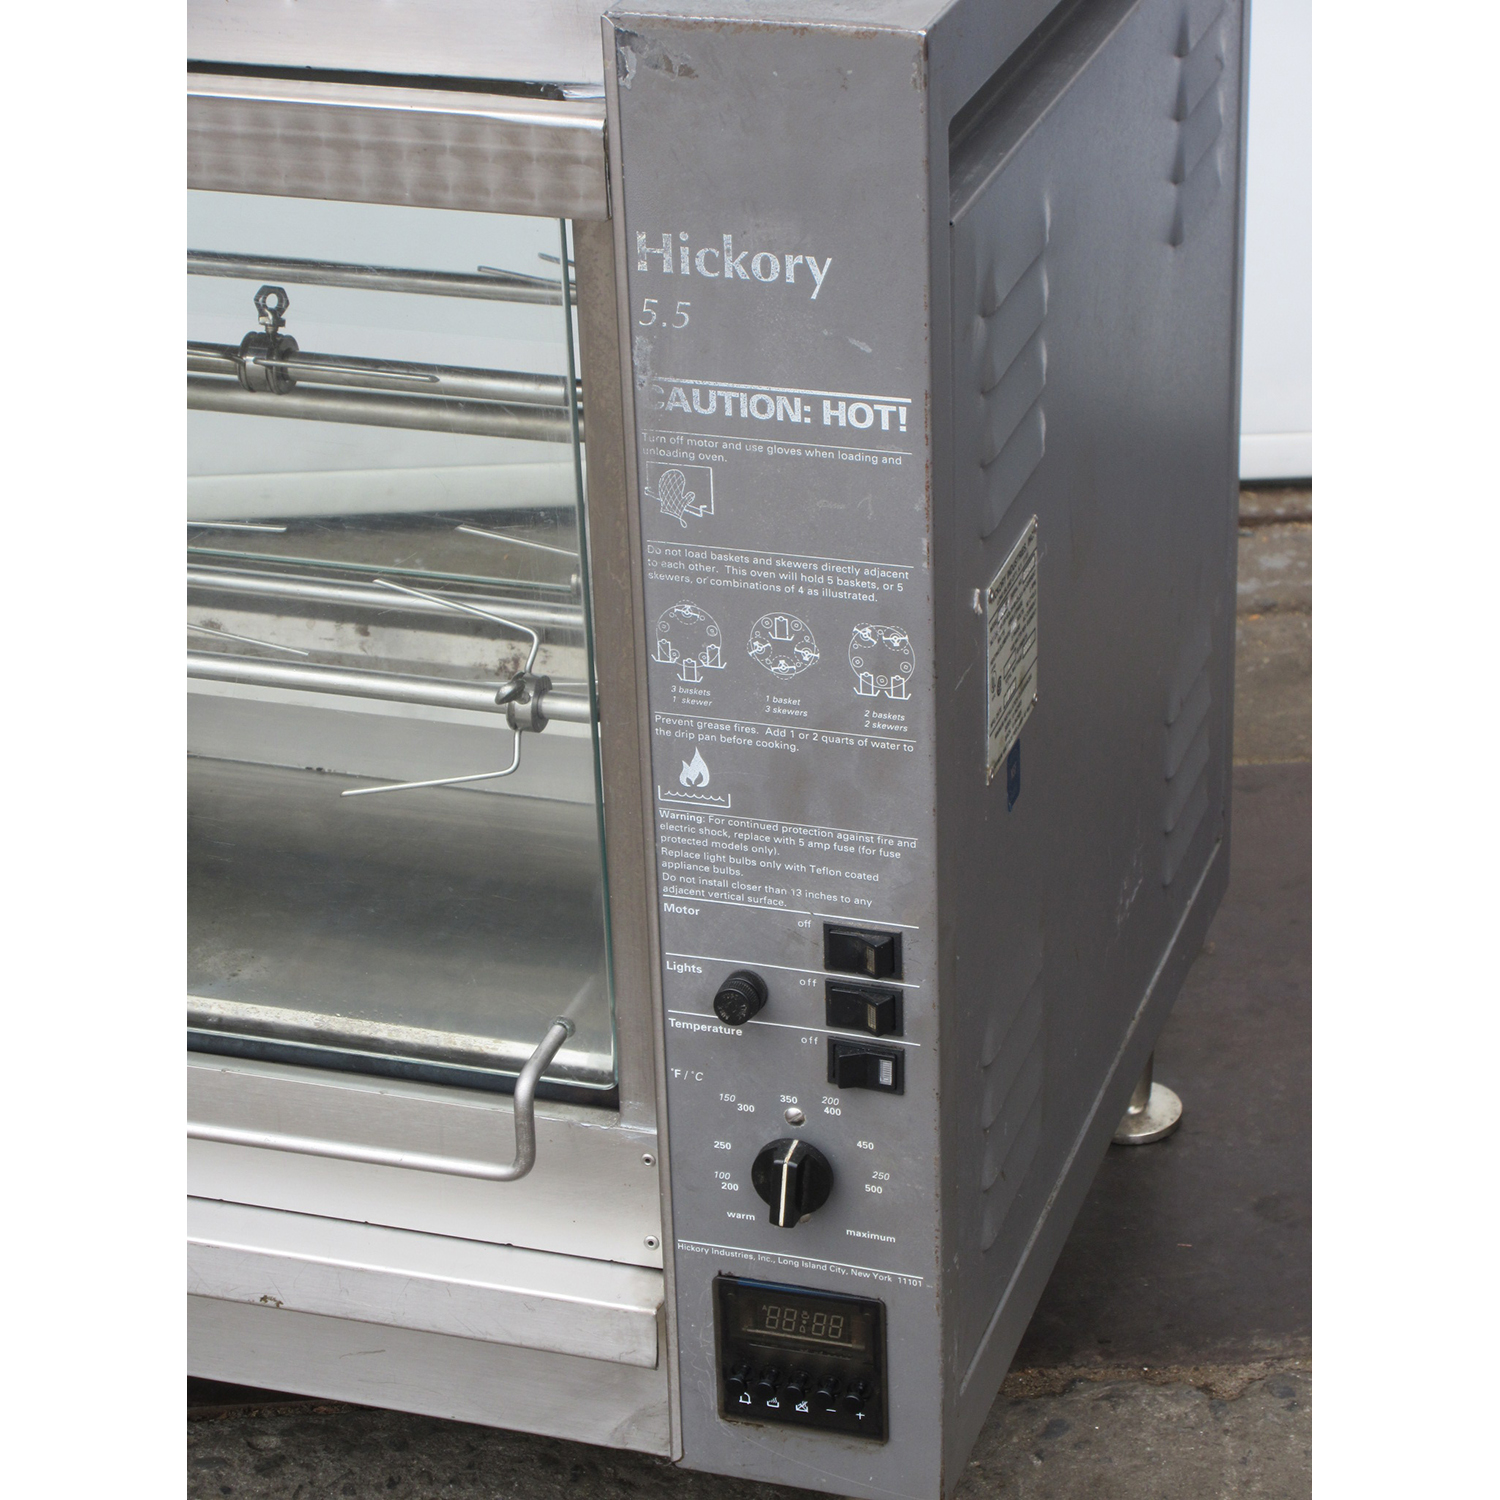 Hickory N/5.5 E Rotisserie 5 Spit, Electric, Used Excellent Condition image 1